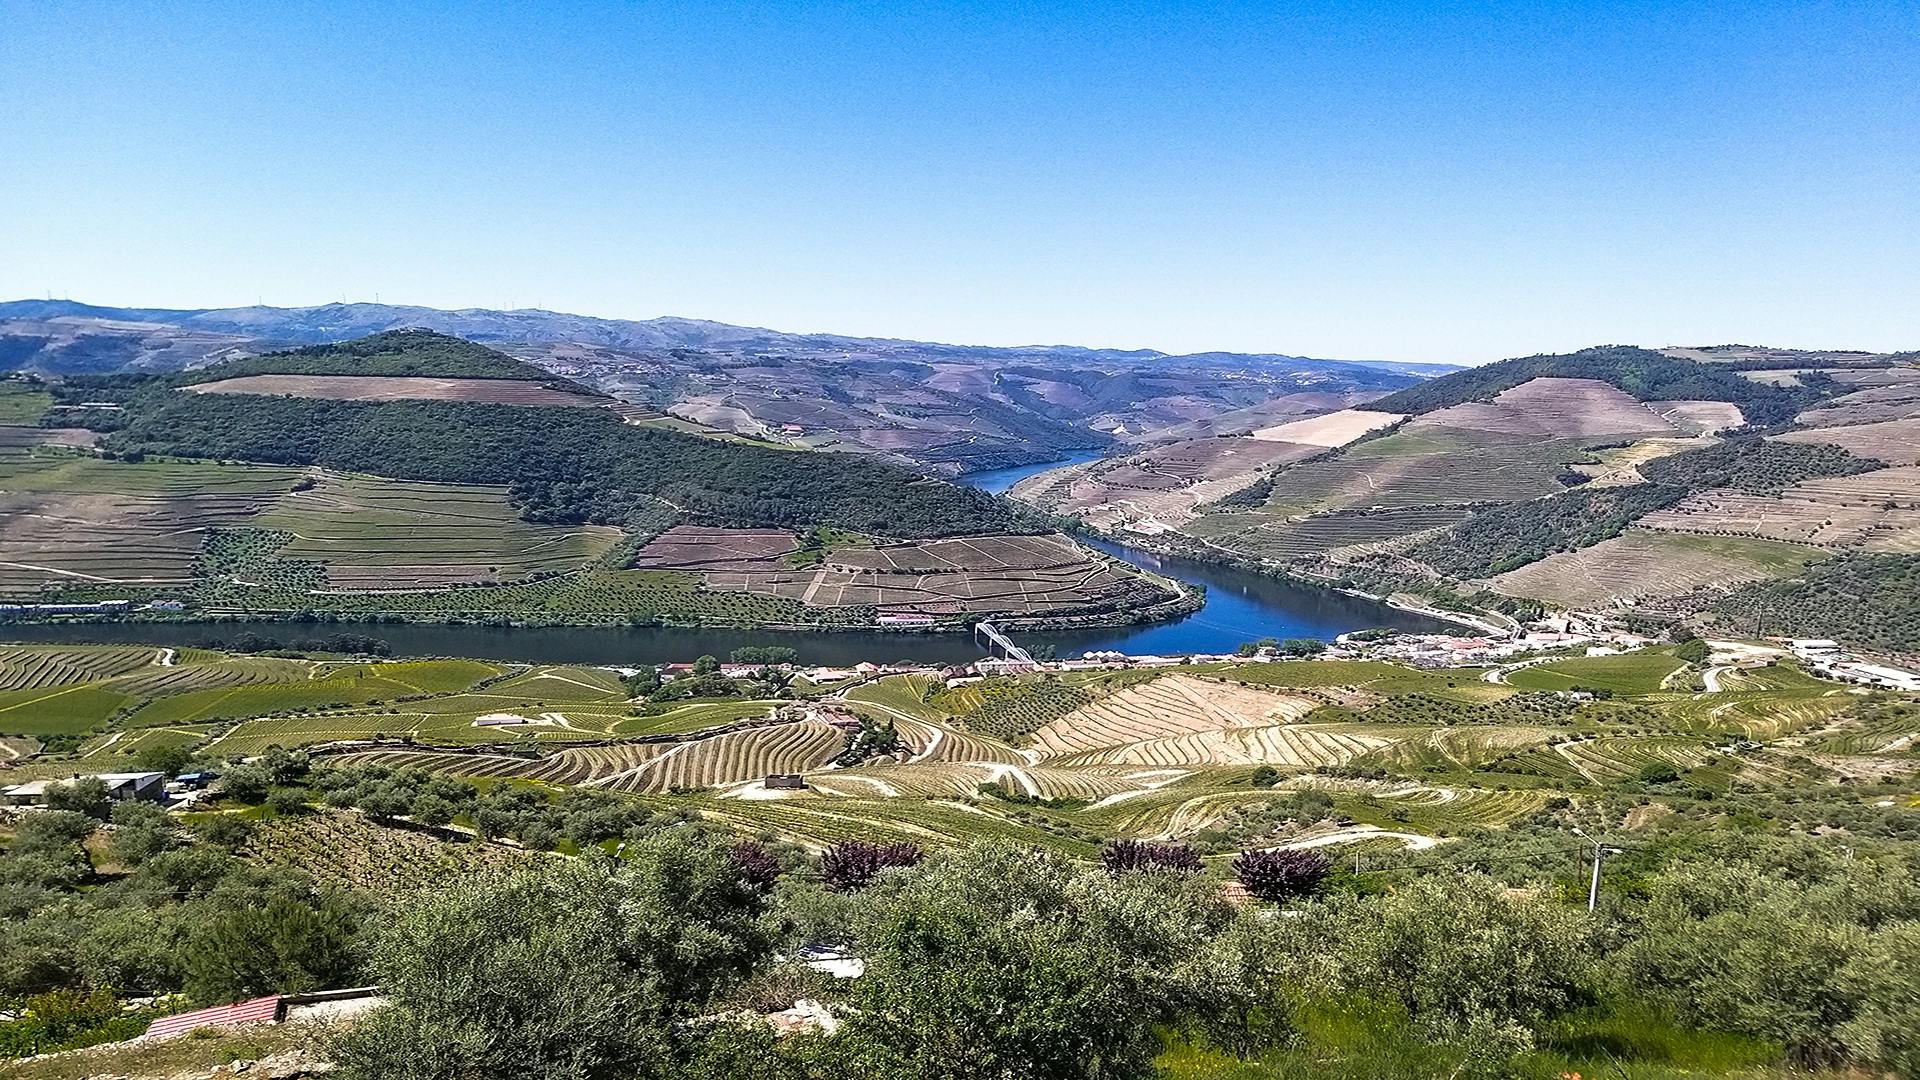 Full-day Douro Valley and wineries tour